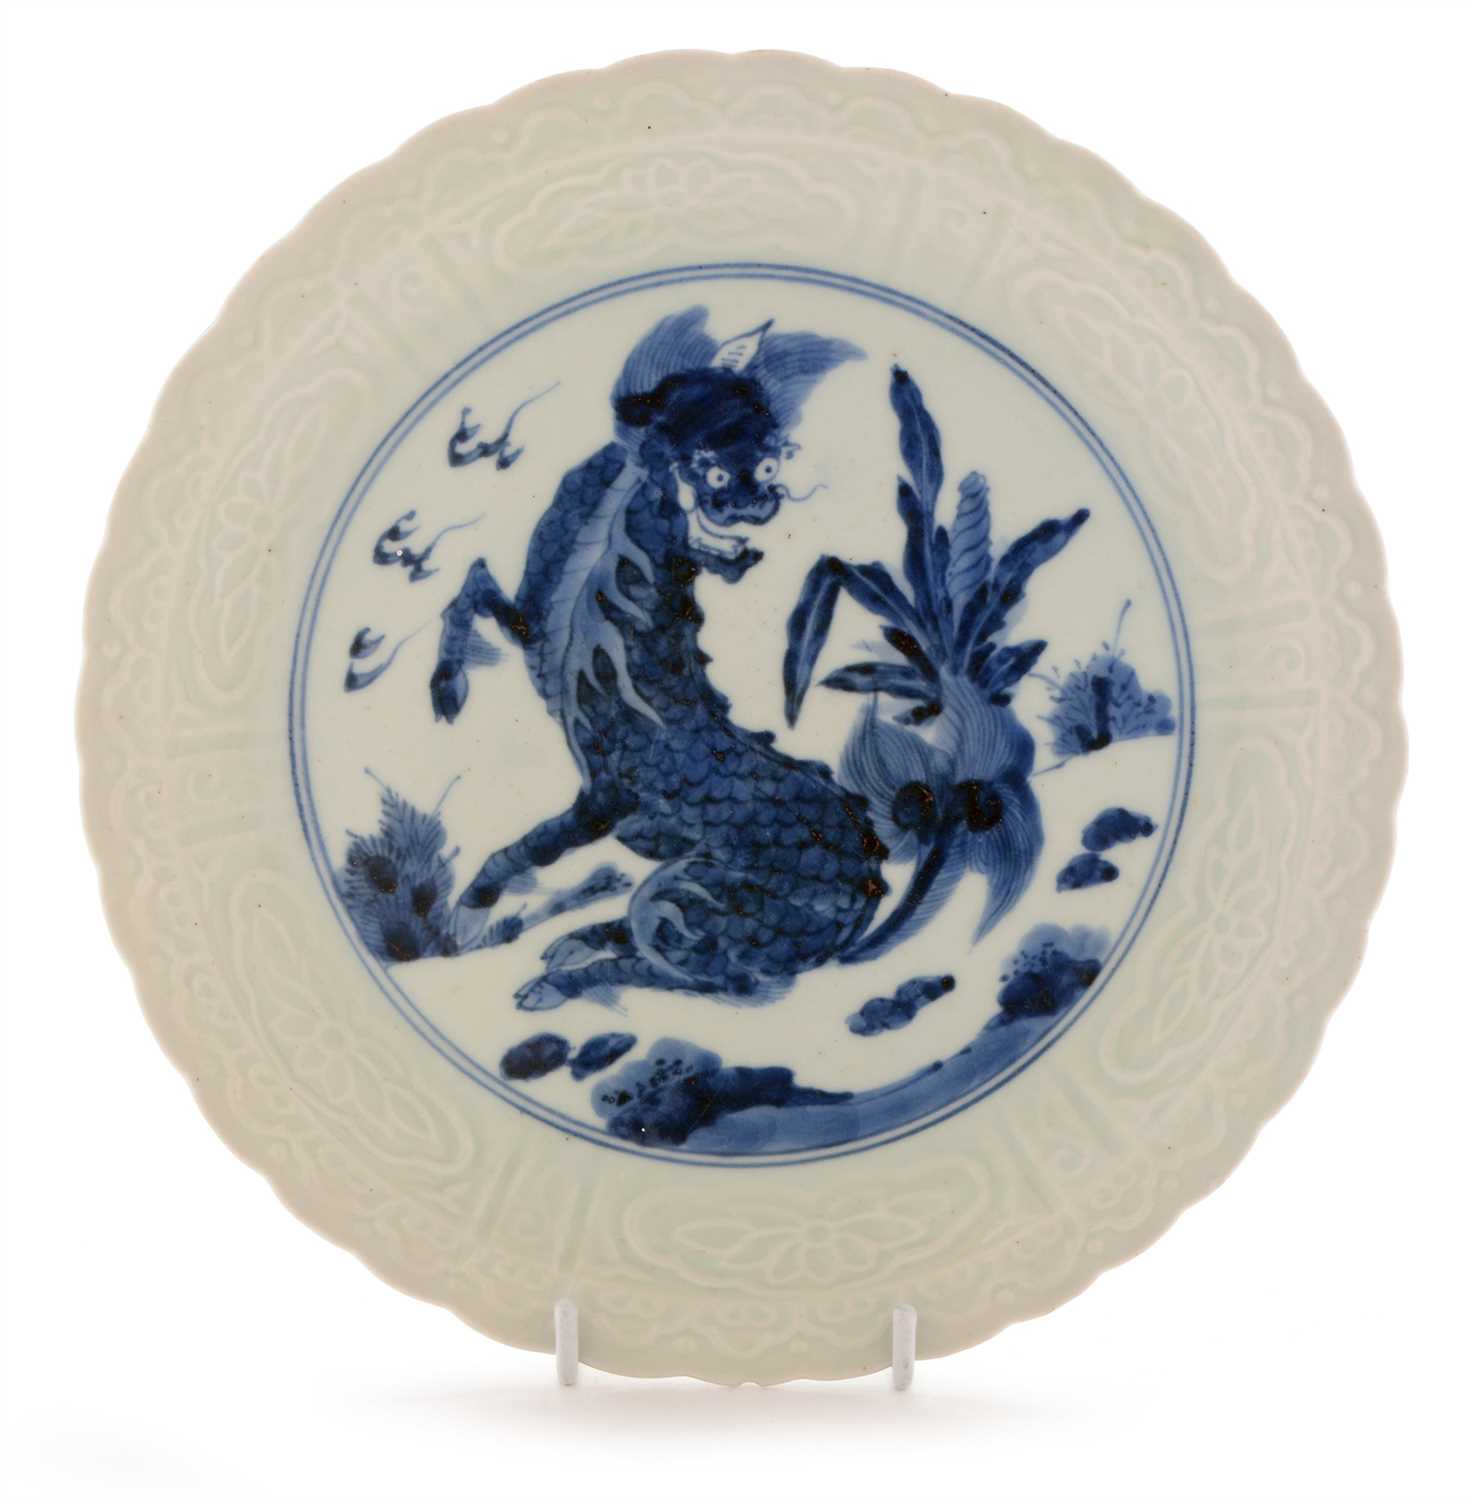 Lot 474 - Chinese blue and white plate